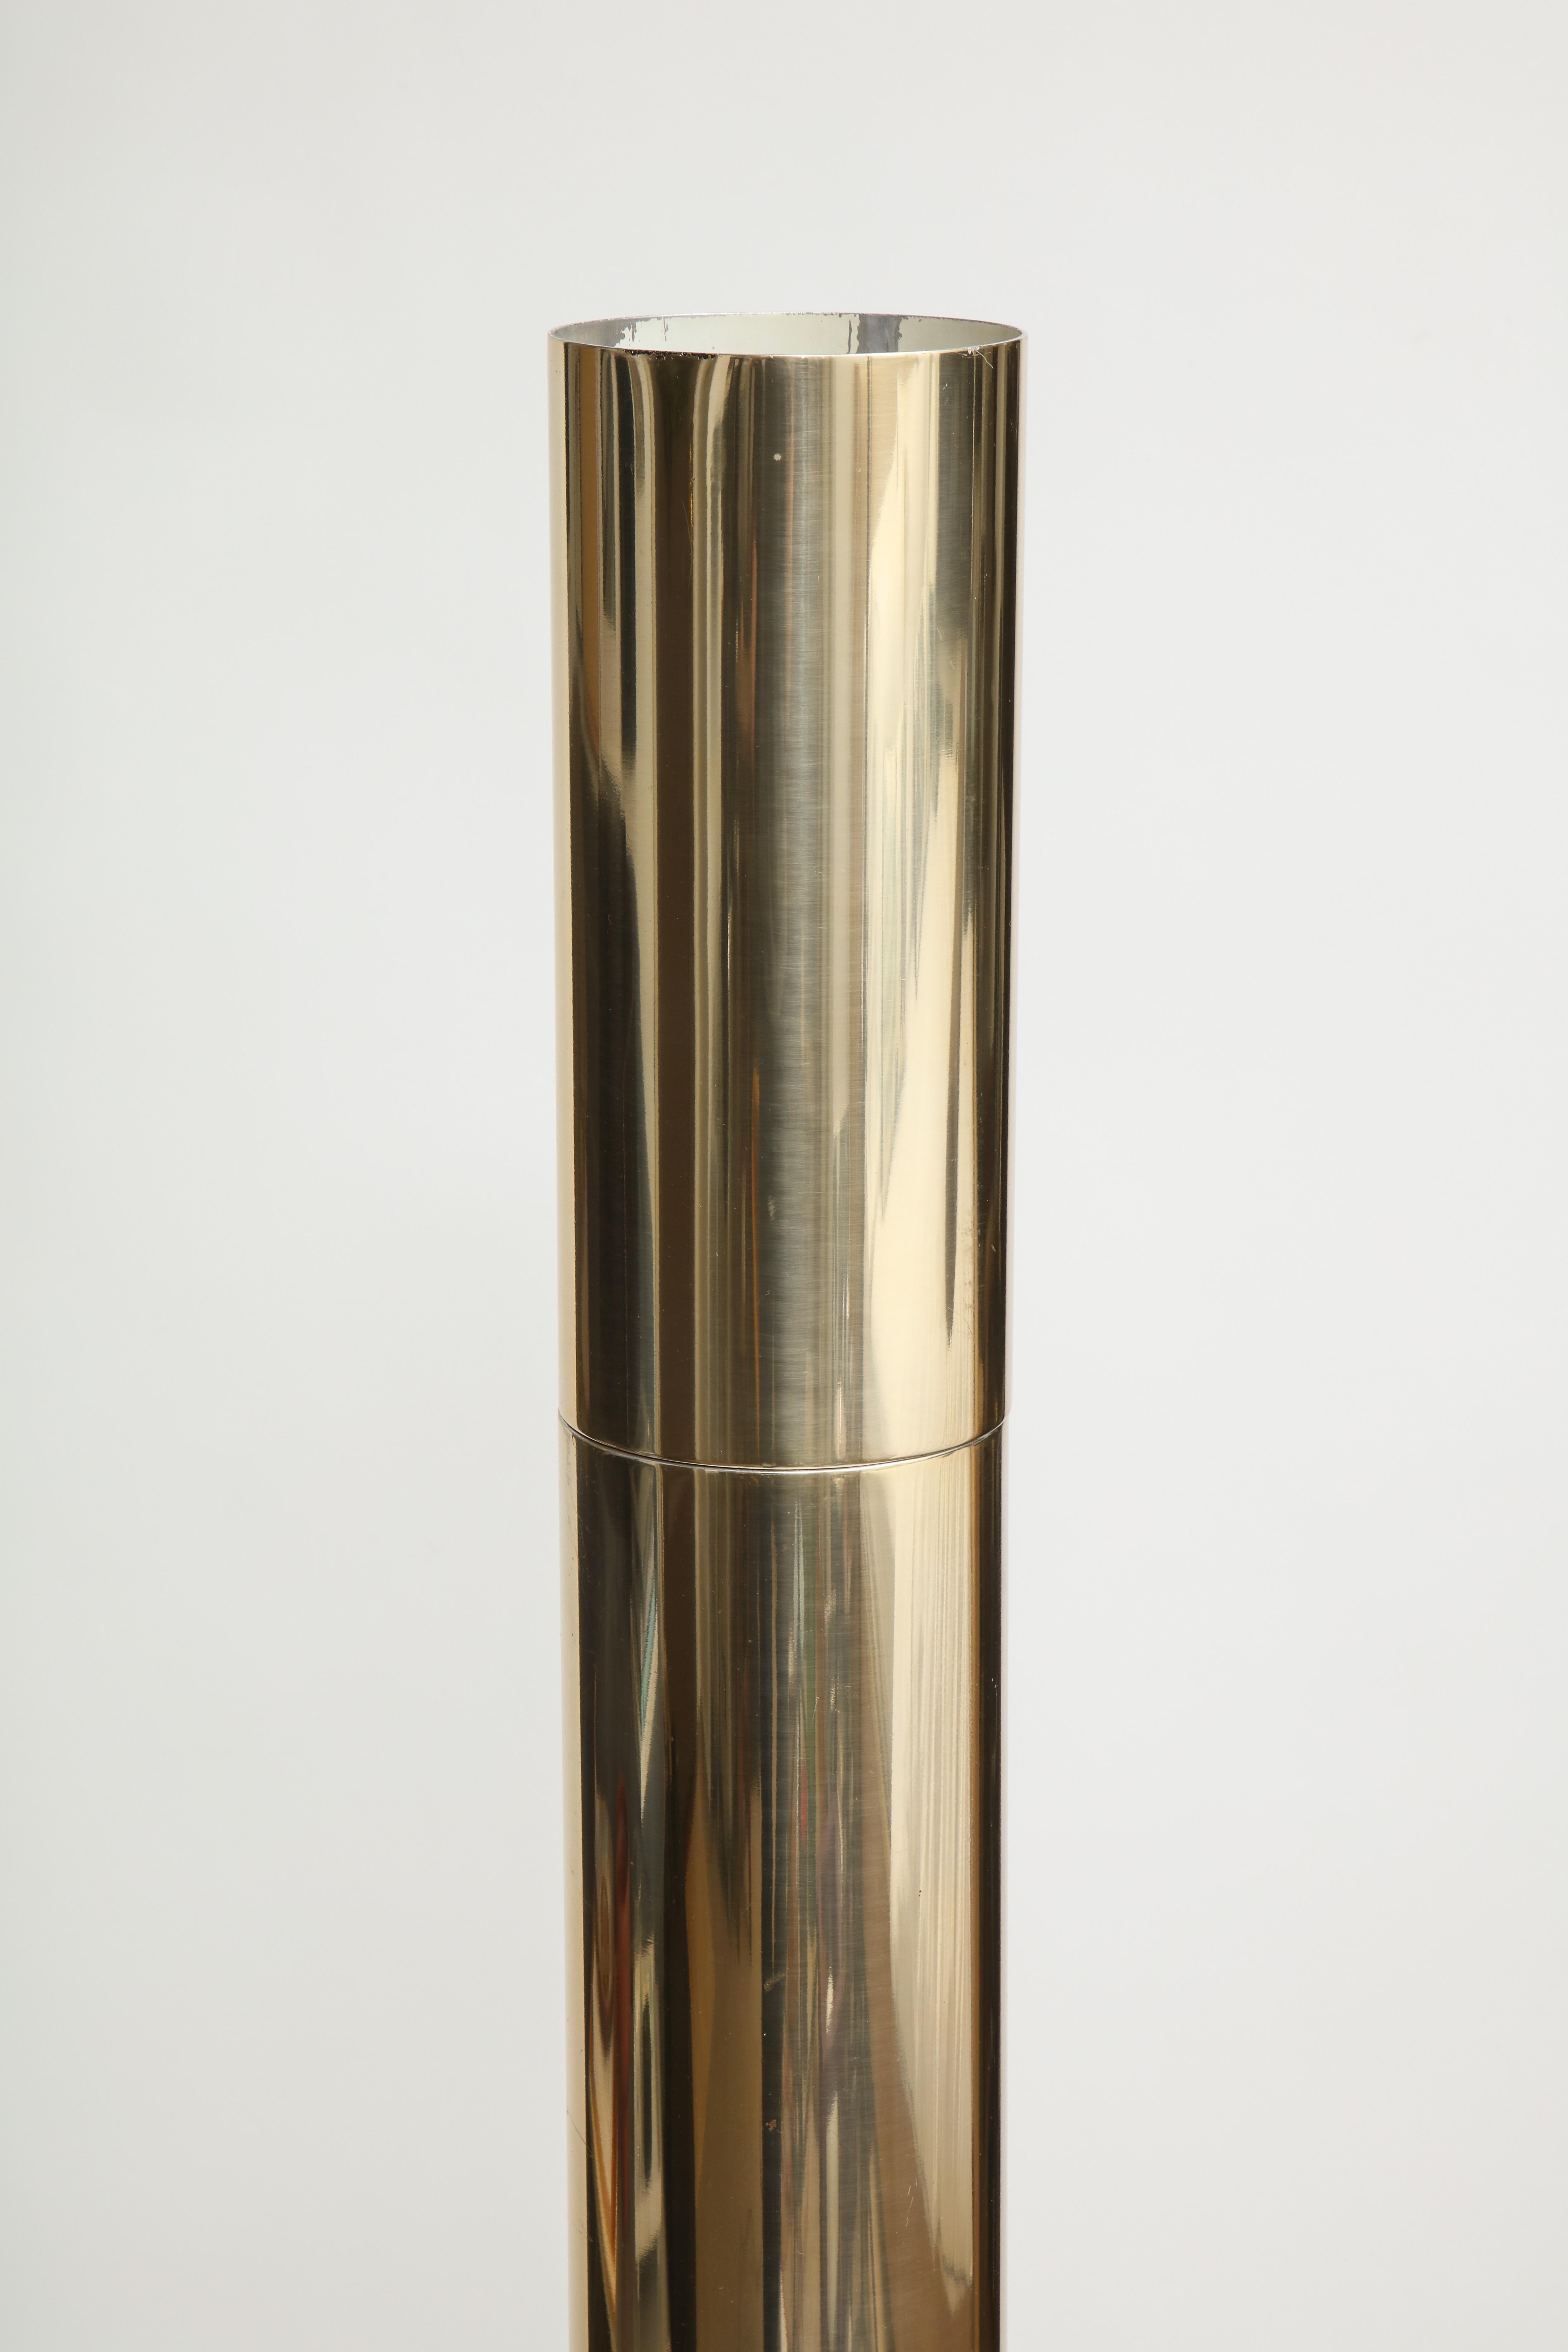 Late 20th Century Modernist Brass and Etched Glass Cylinder Floor Lamp For Sale